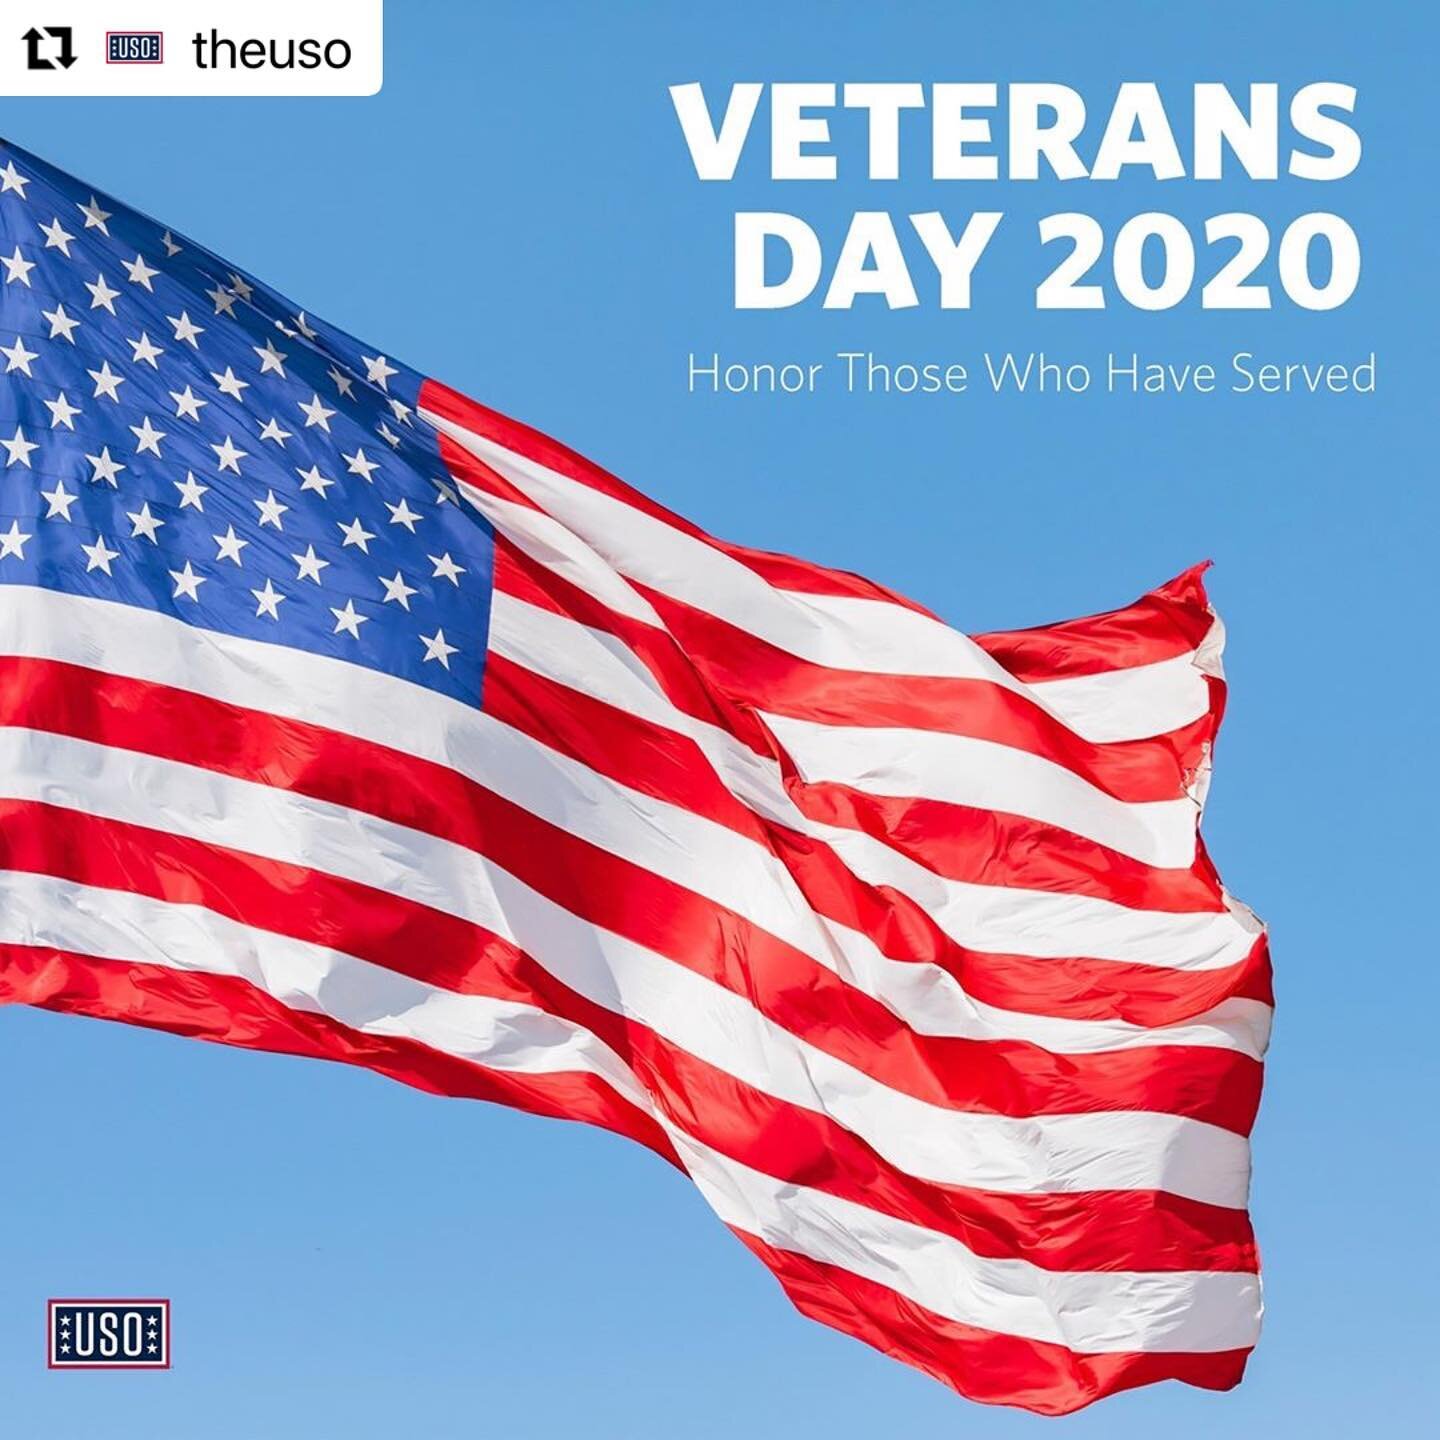 #Repost @theuso
・・・
This Veterans Day, we honor the brave men and women who have served our country. On behalf of a grateful nation, we thank you for your courage, commitment and sacrifice. 
#VeteransDay #BeTheForce #VeteransDay2020 #thankyouforyours